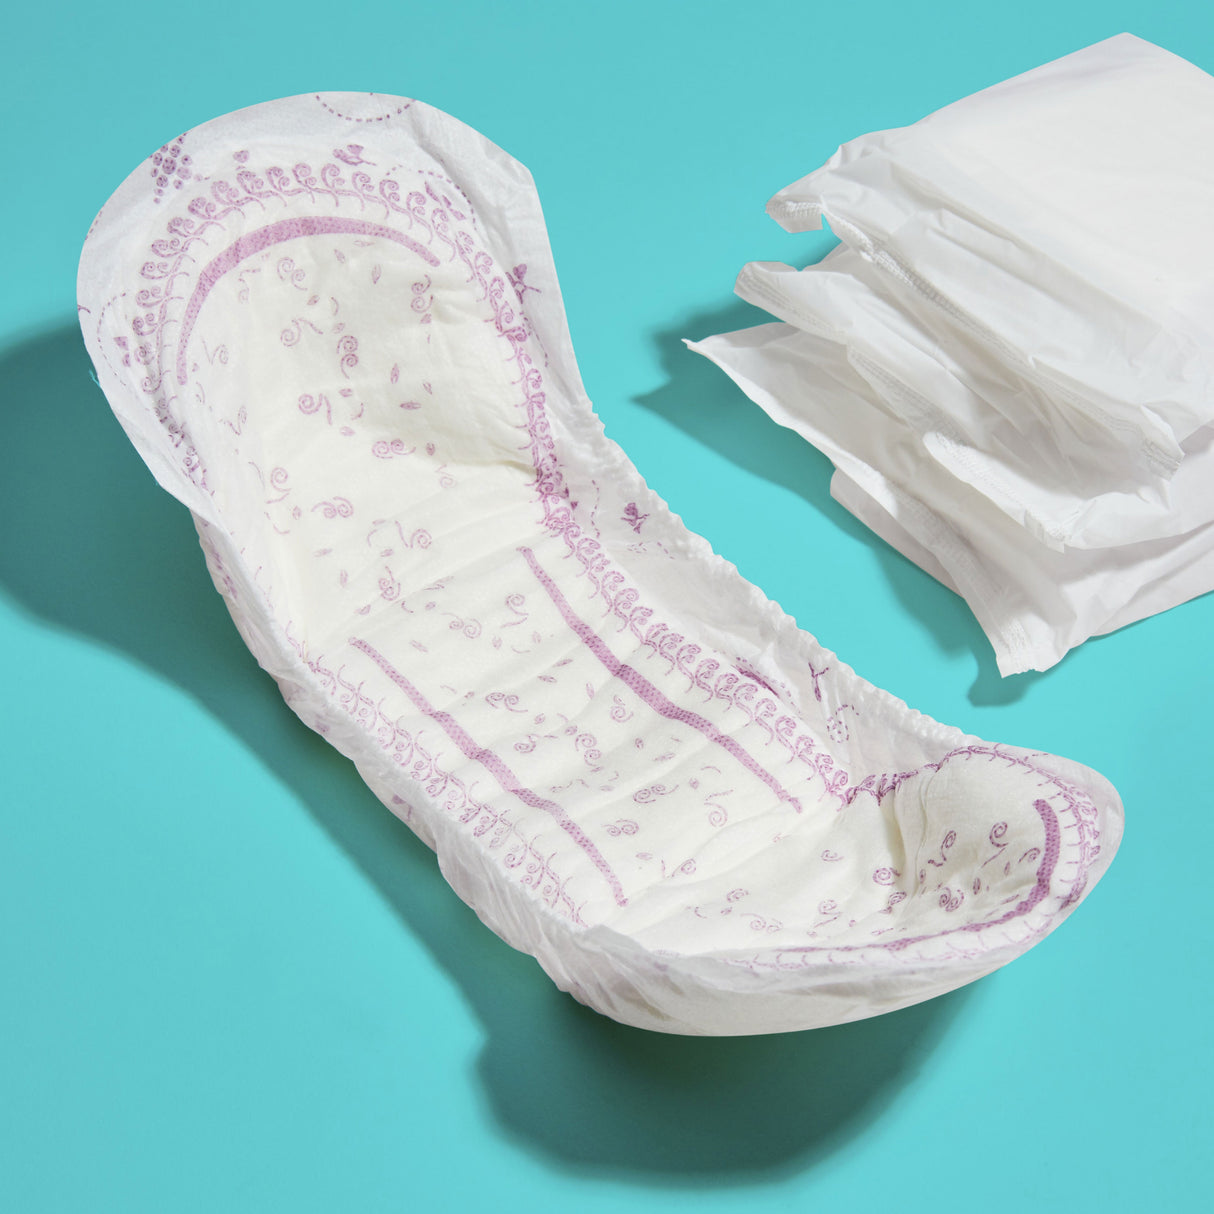 A curved pad that looks absorbent and comfortable next to three individually wrapped pads 